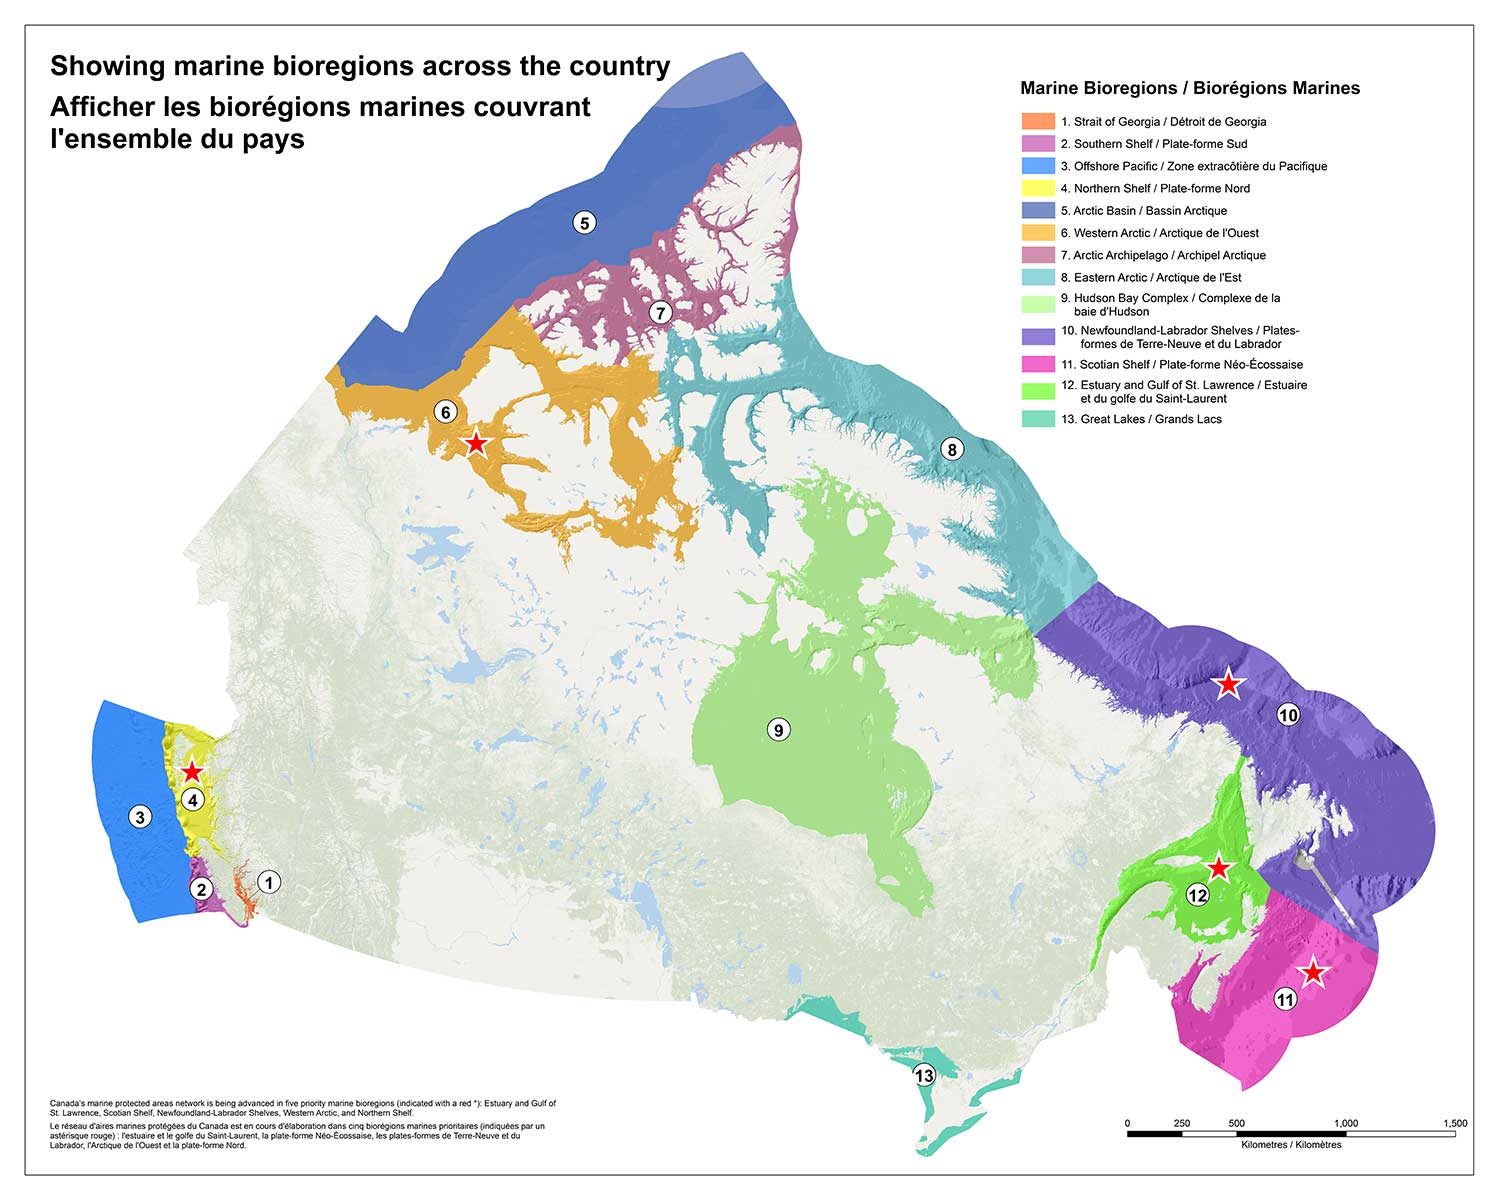 Canada’s marine protected areas network is being advanced in five priority bioregions (indicated with a red star): Estuary and Gulf of St. Lawrence, Scotian Shelf, Newfoundland-Labrador Shelves, Western Arctic, and Northern Shelf.